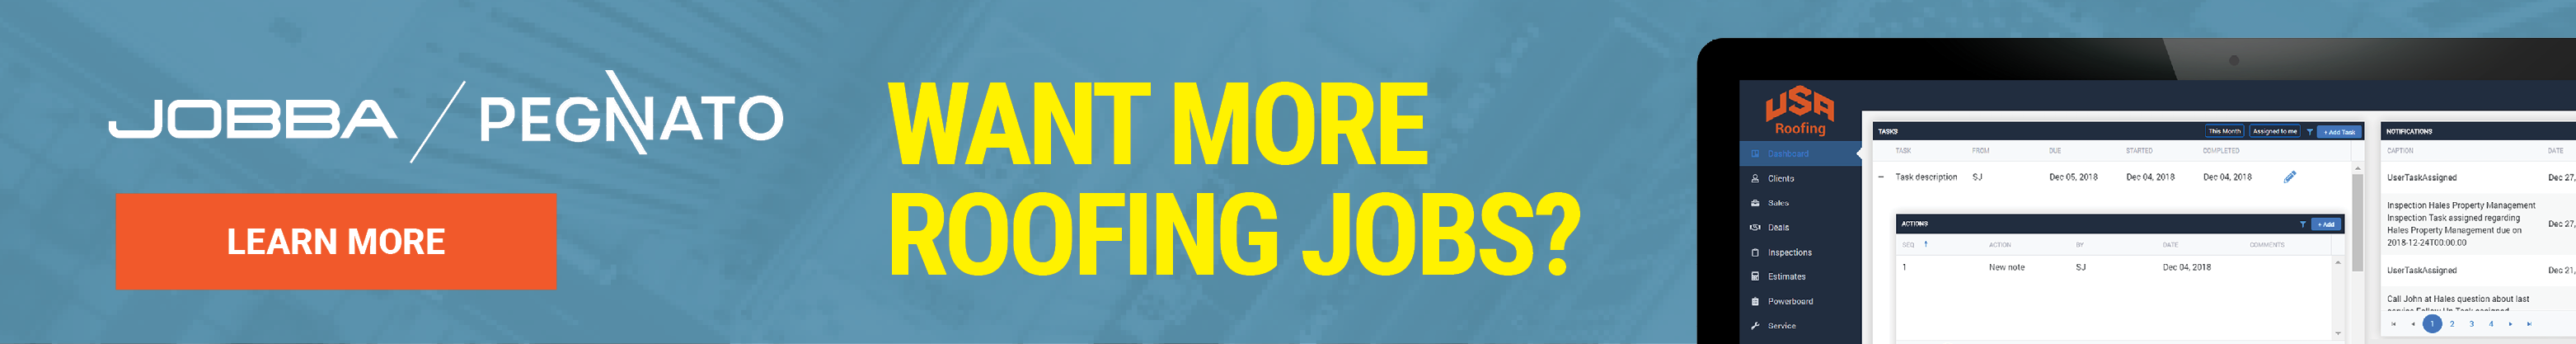 Jobba - Banner Ad - Want More Roofing Jobs?